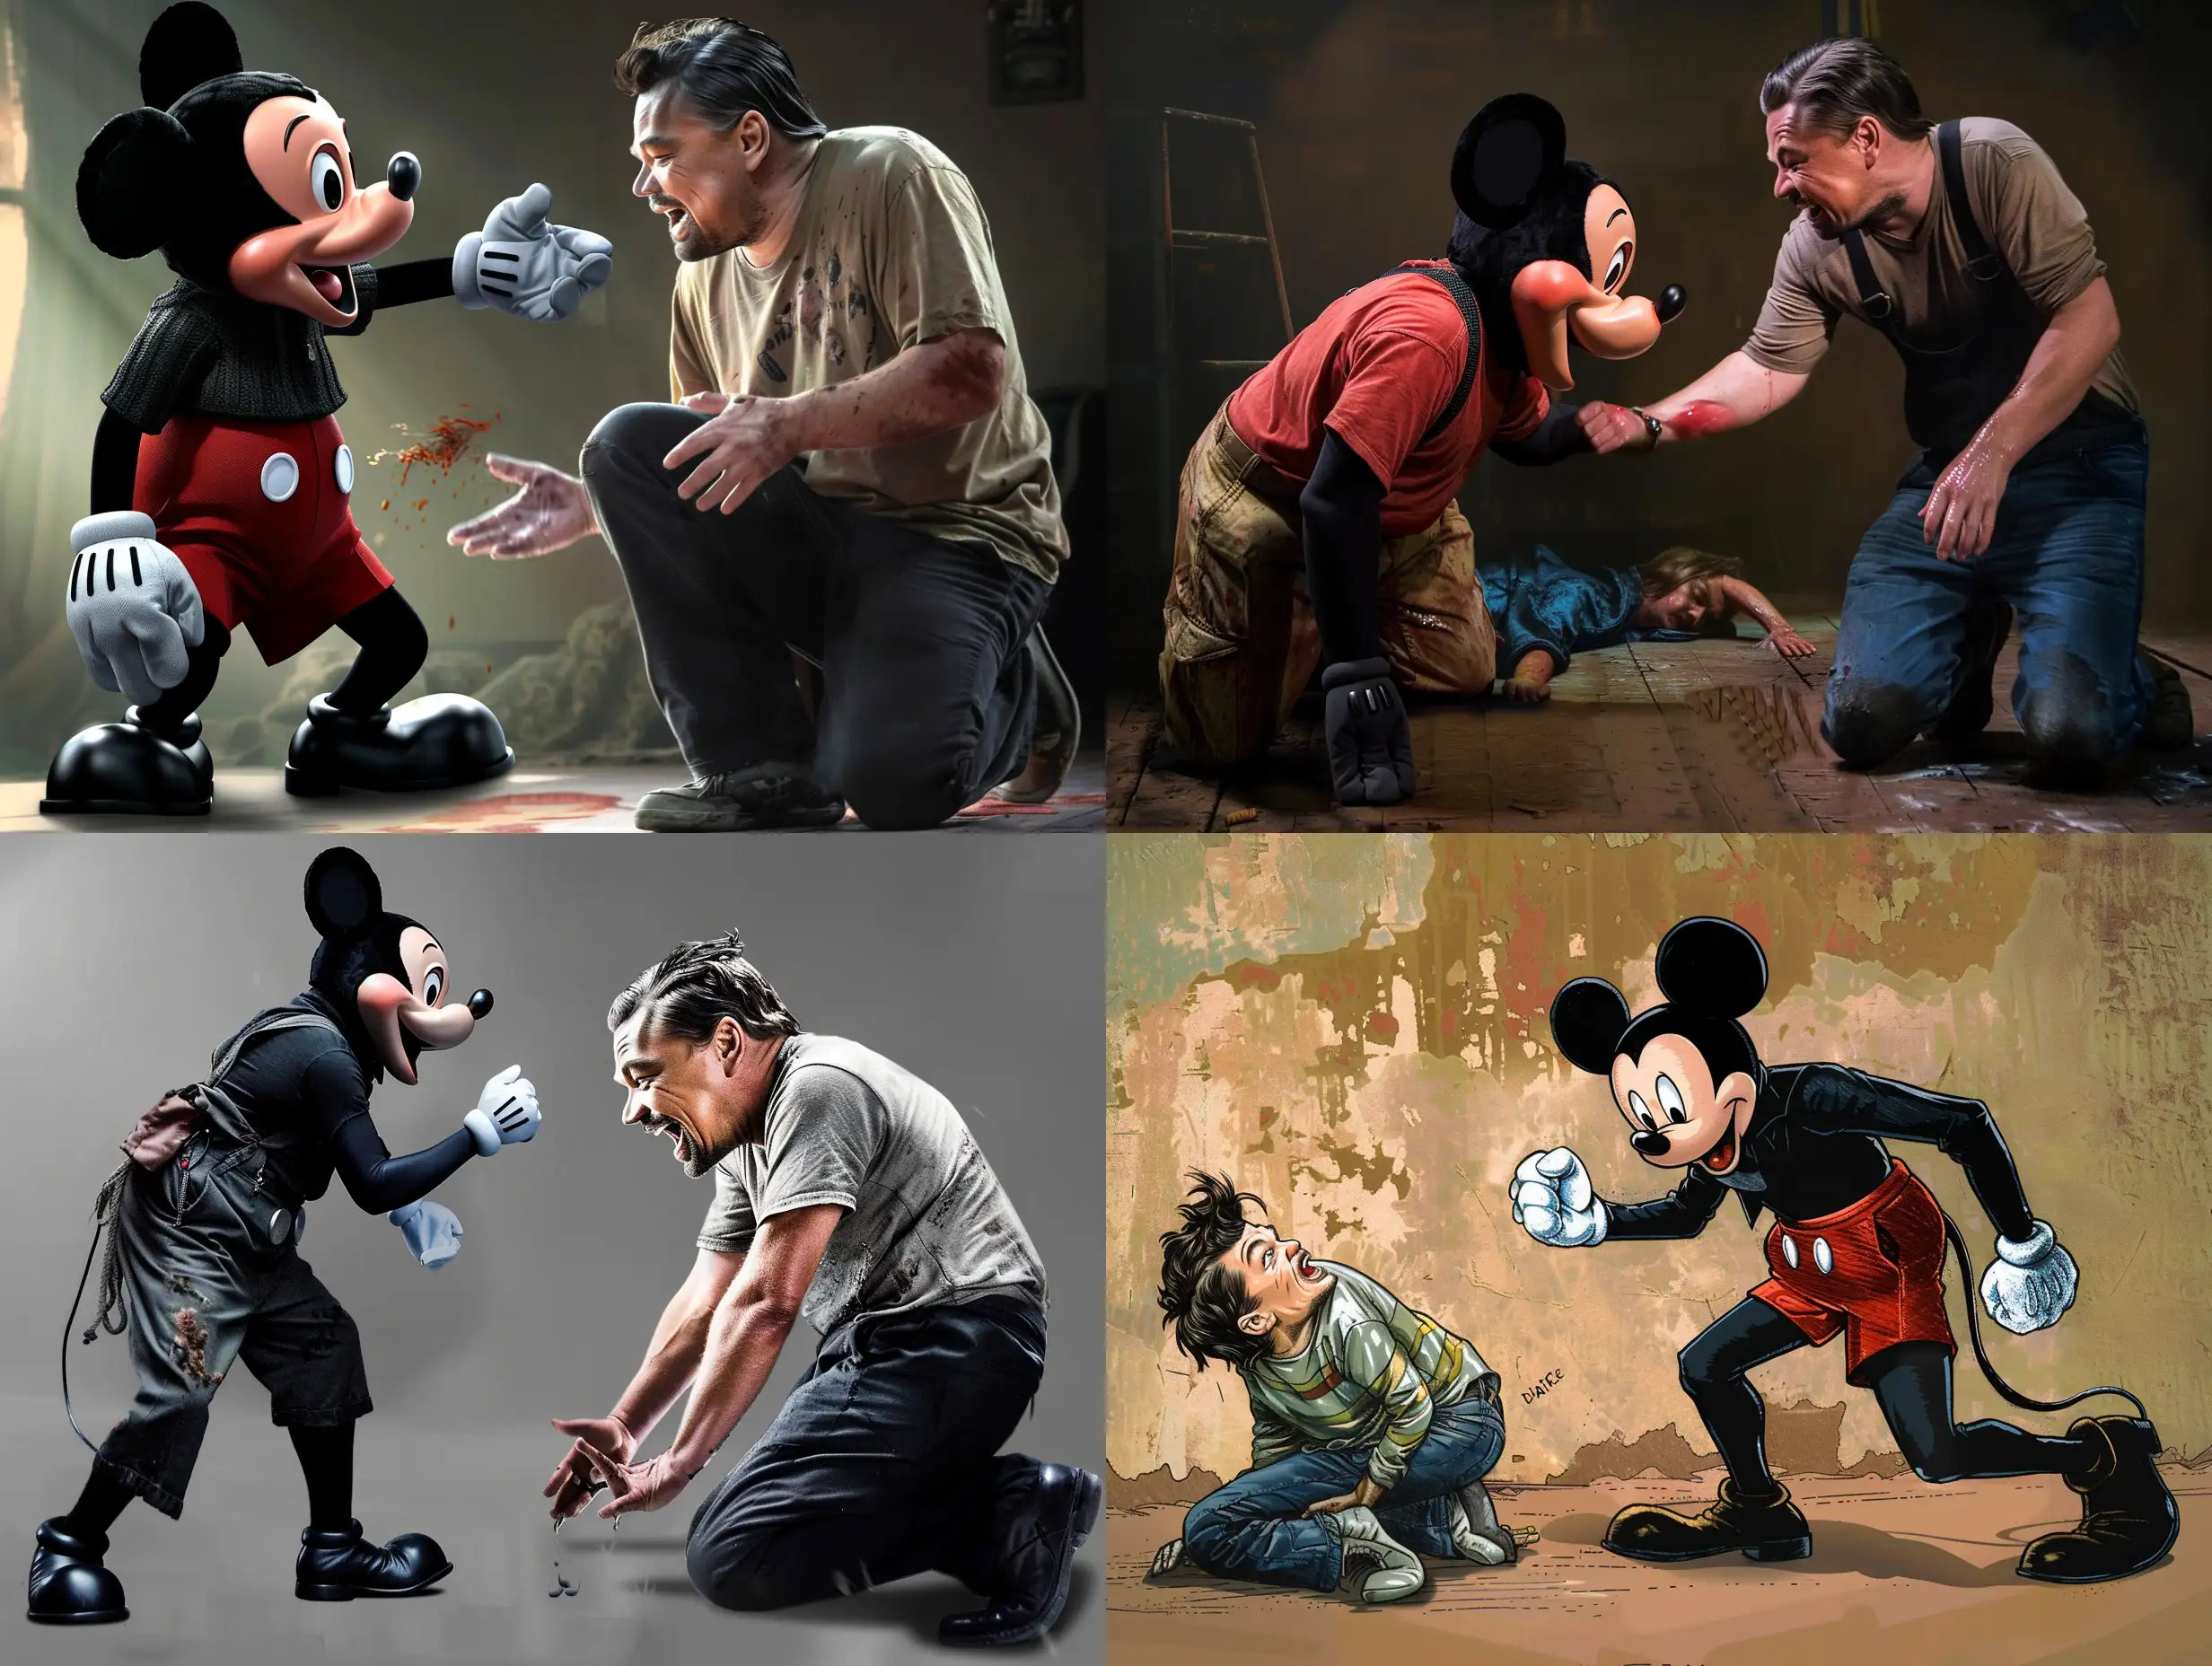 Mickey mouse shouts angrily at a crying begging Leonardo dicaprio who is on his knees